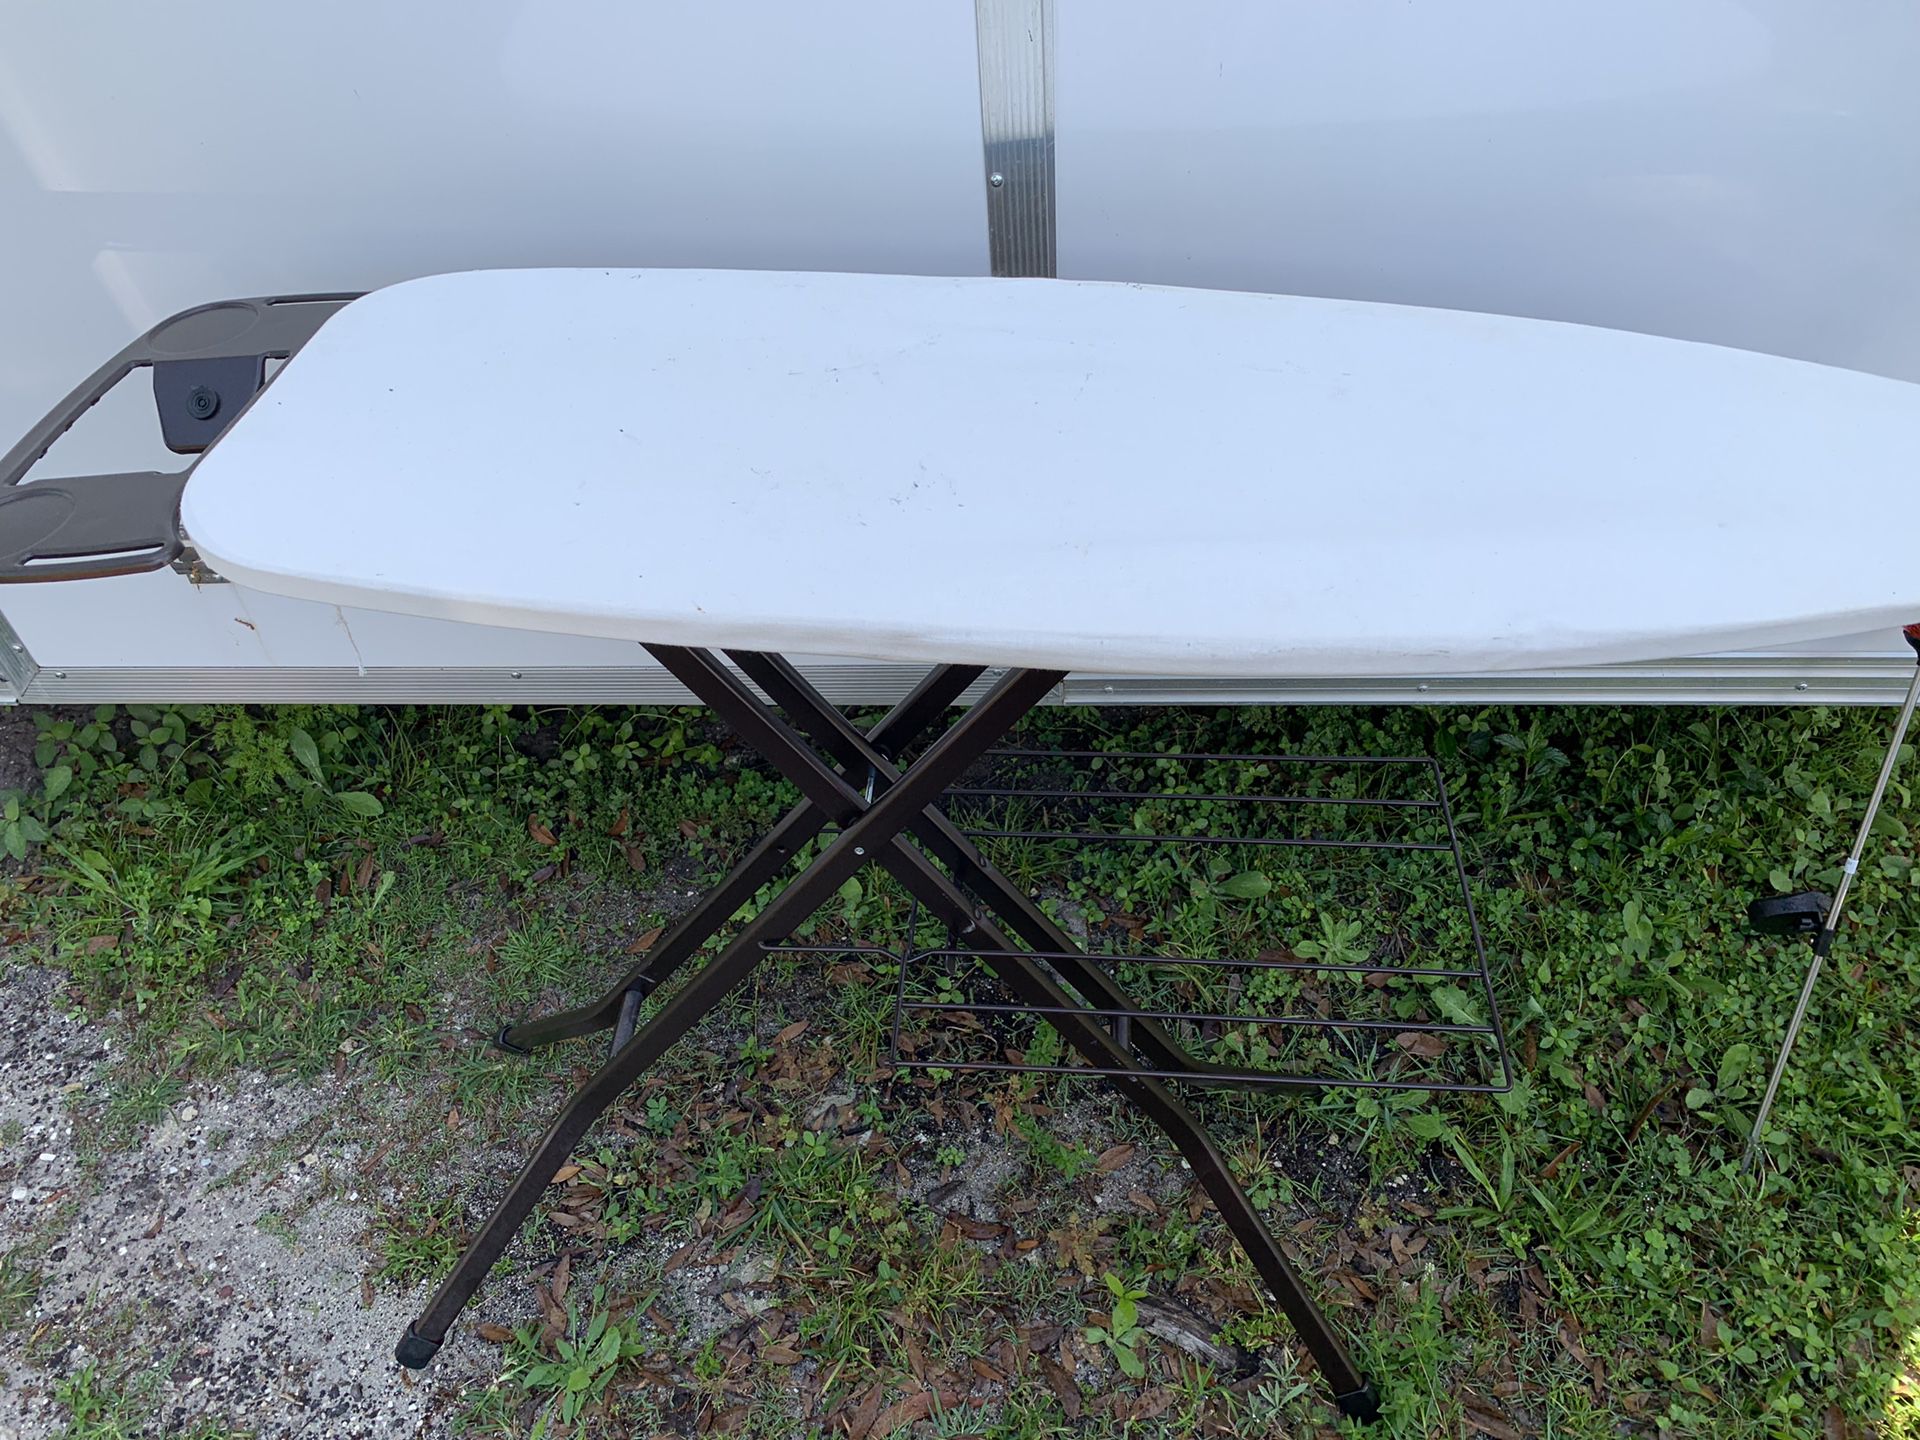 Nice quality ironing board with iron stand. Pick up in Jupiter.